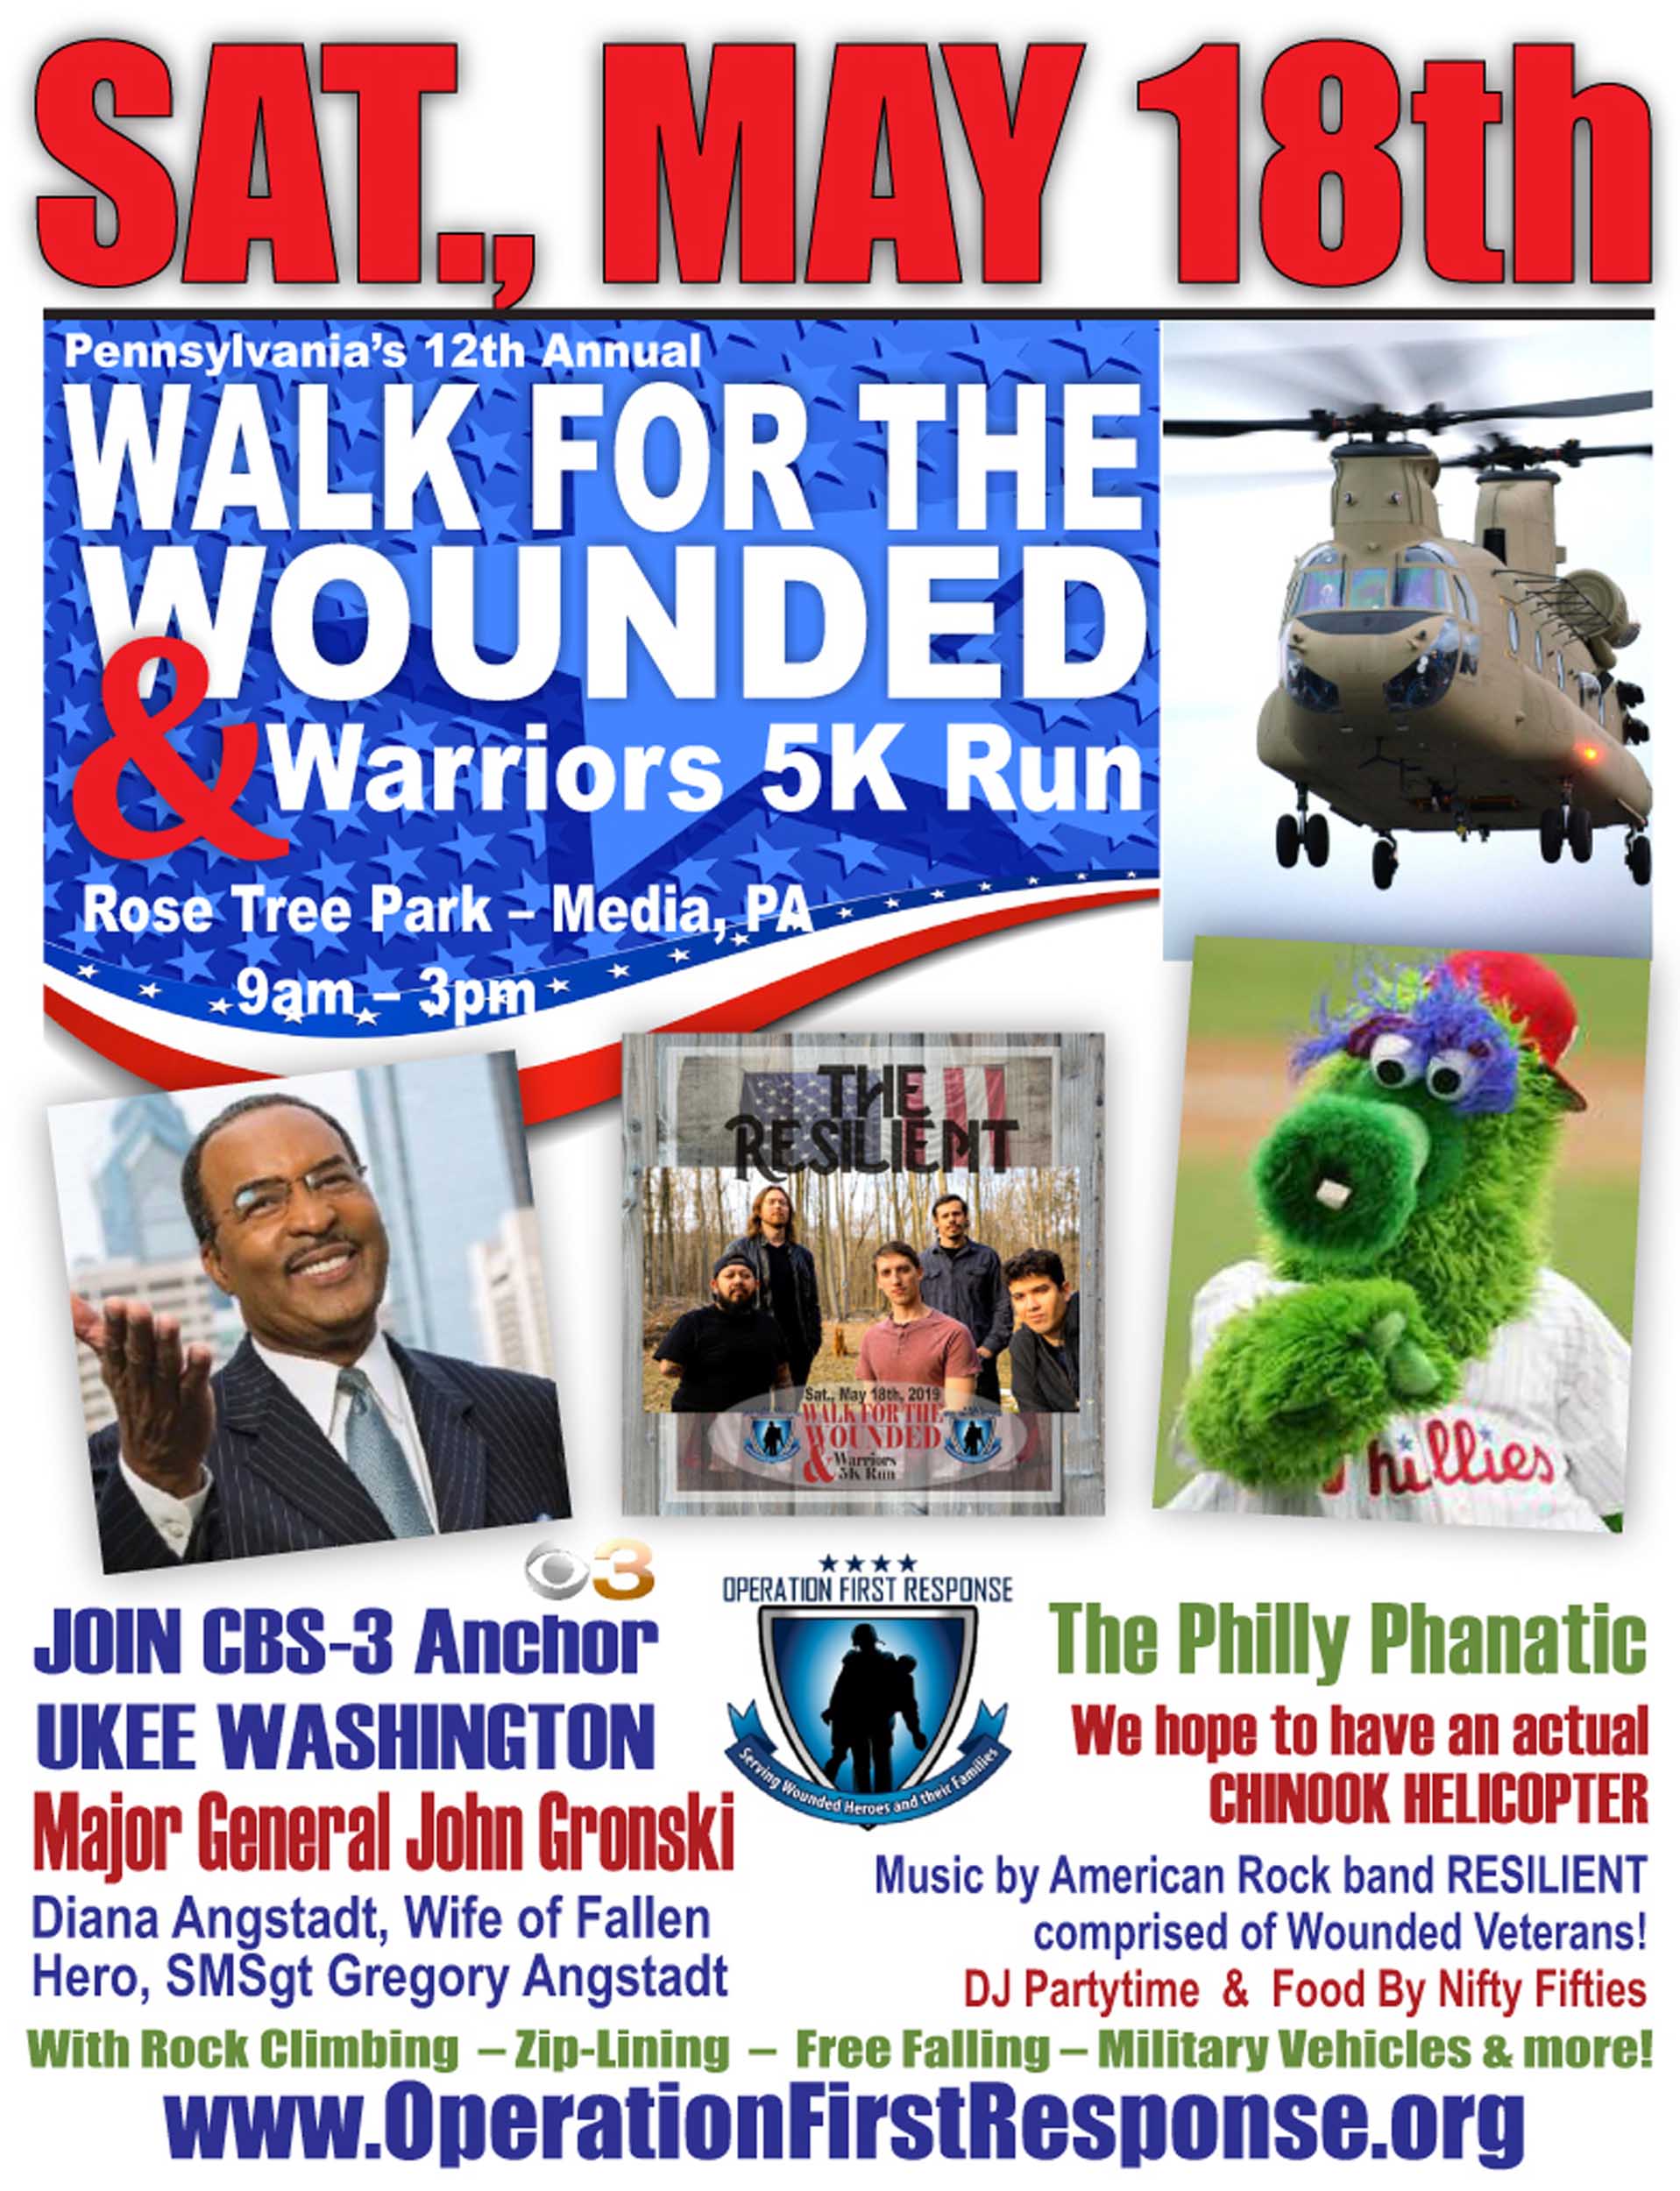 Walk for the Wounded & Warriors 5k Run